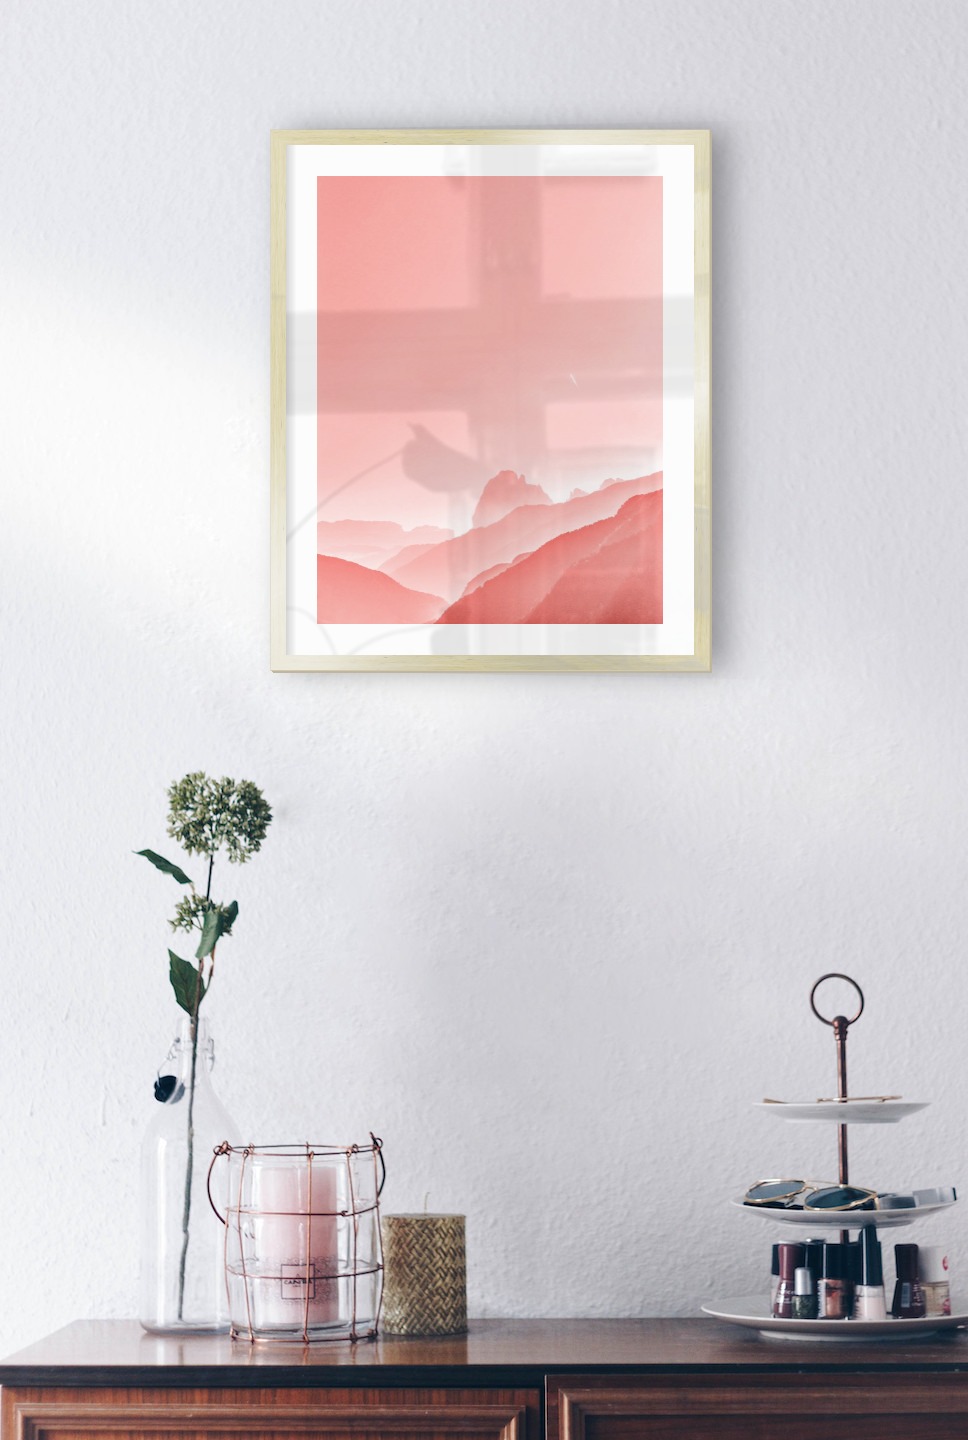 Gallery wall with picture frame in gold in size 40x50 with print "Pink sky"